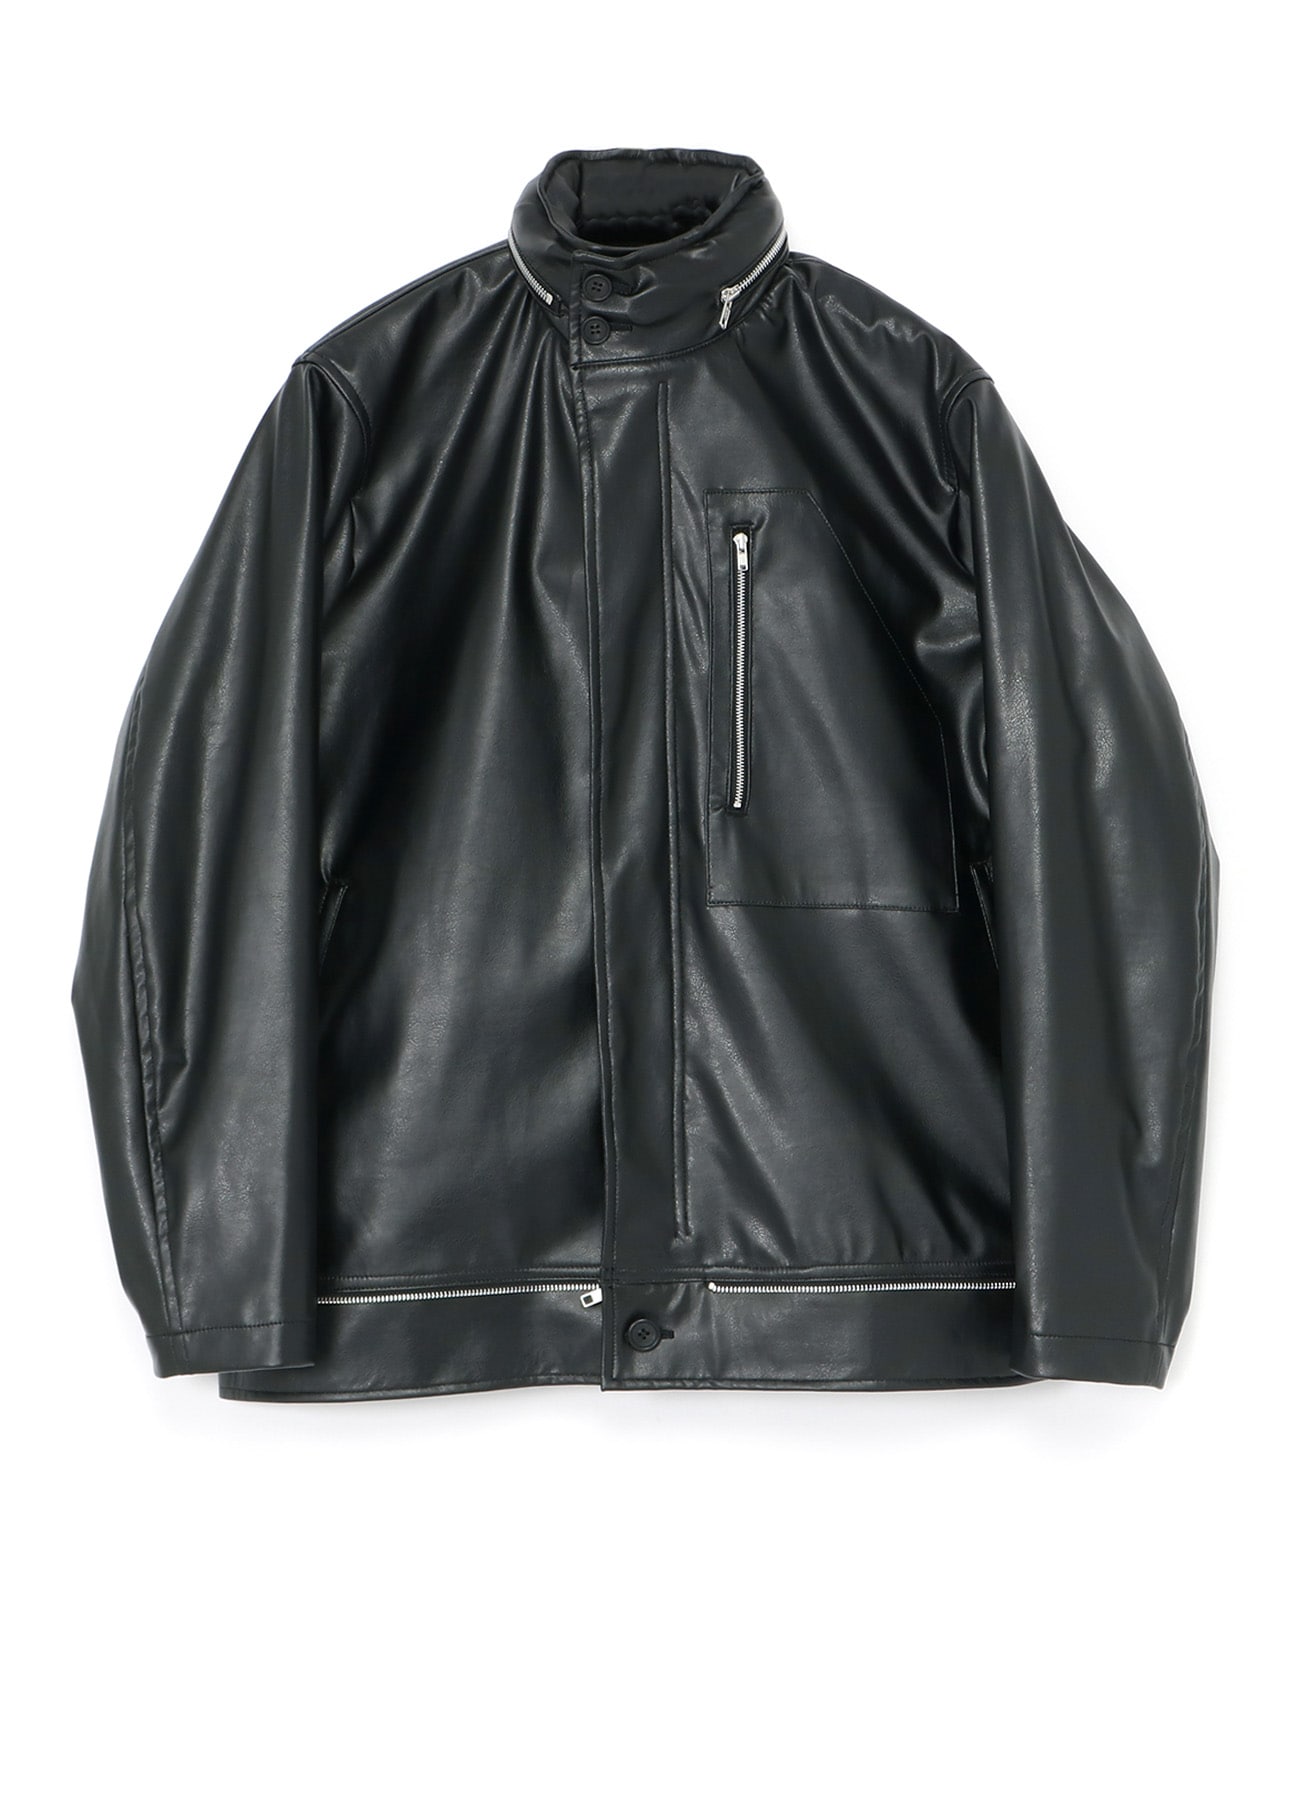 【knuthmarf】layered motorcycle coat blackAMAIL